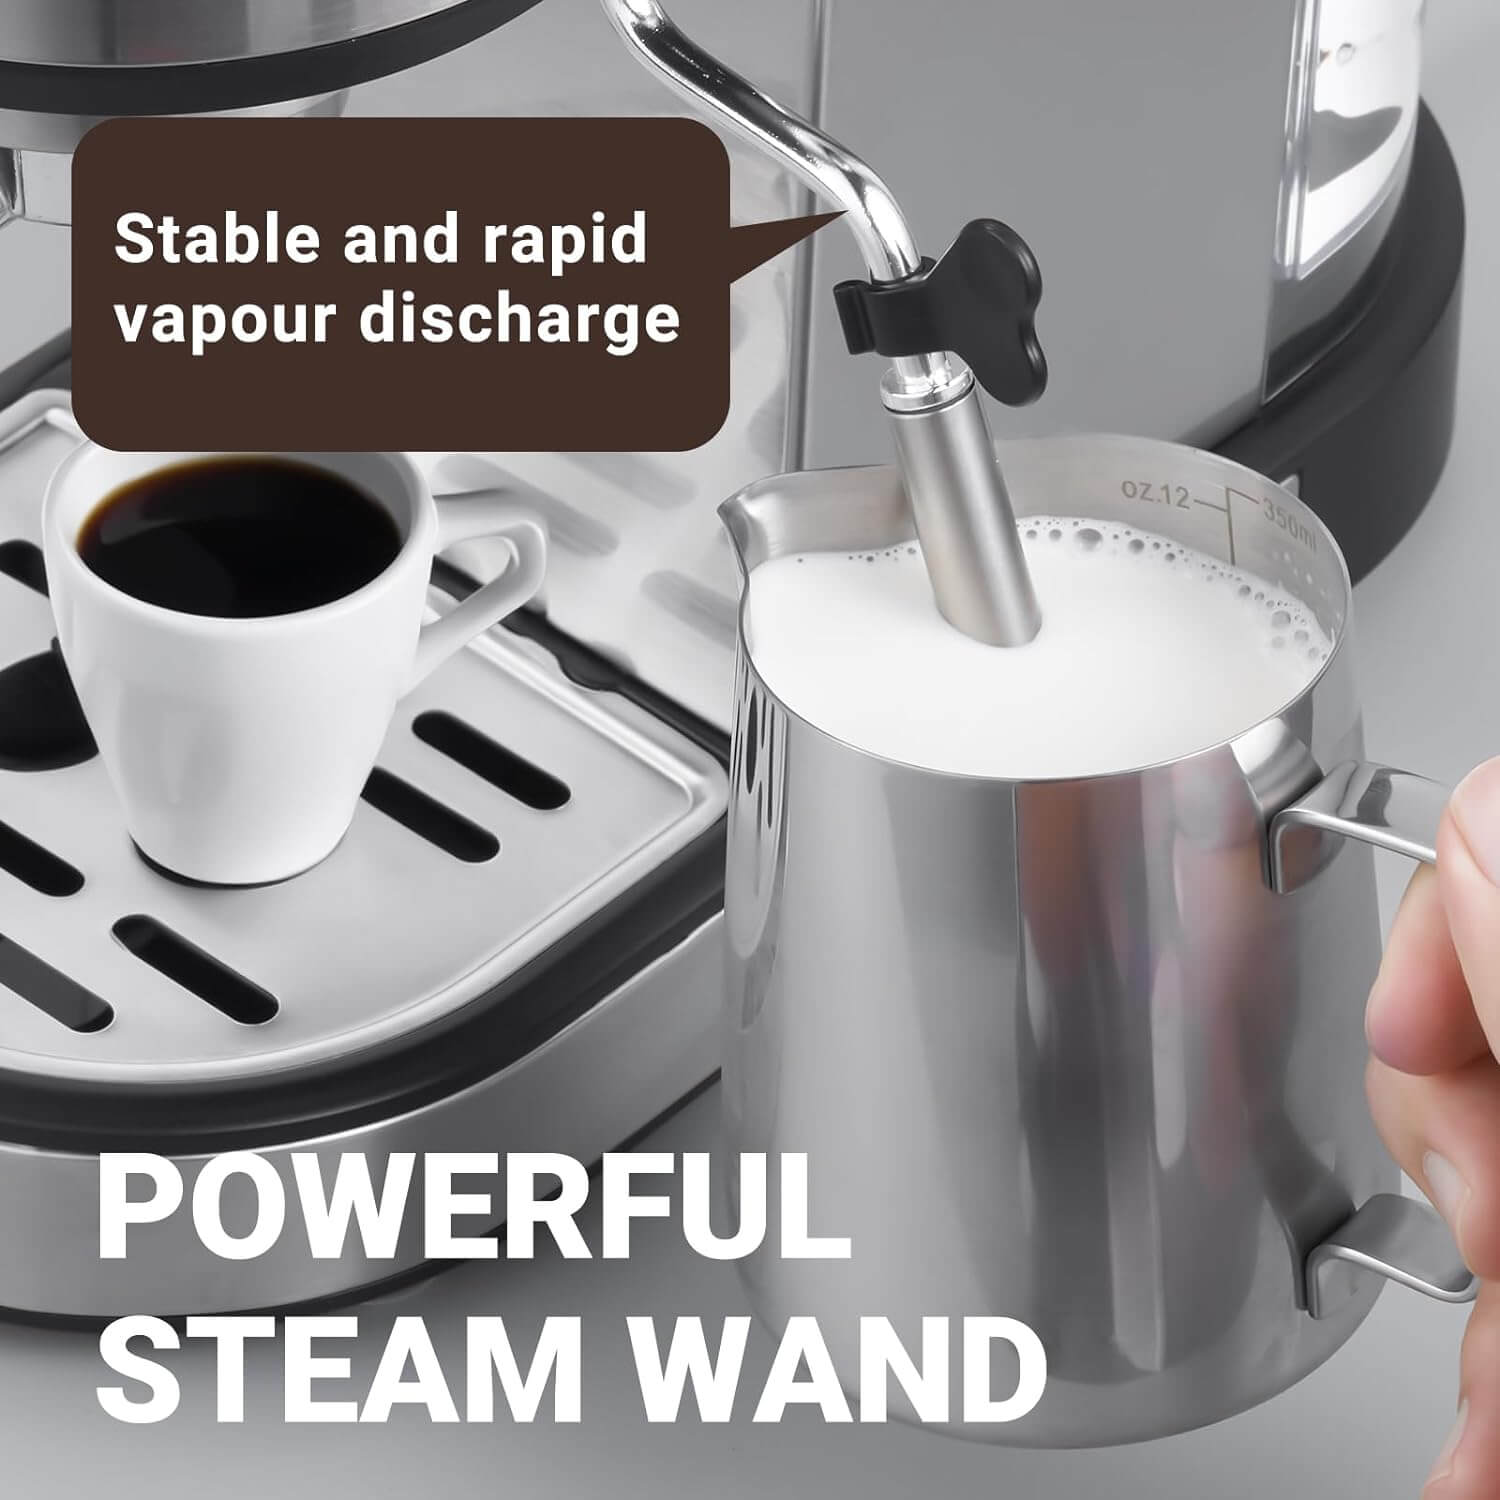 Milk Frother vs Steam Wand: Which is Better?